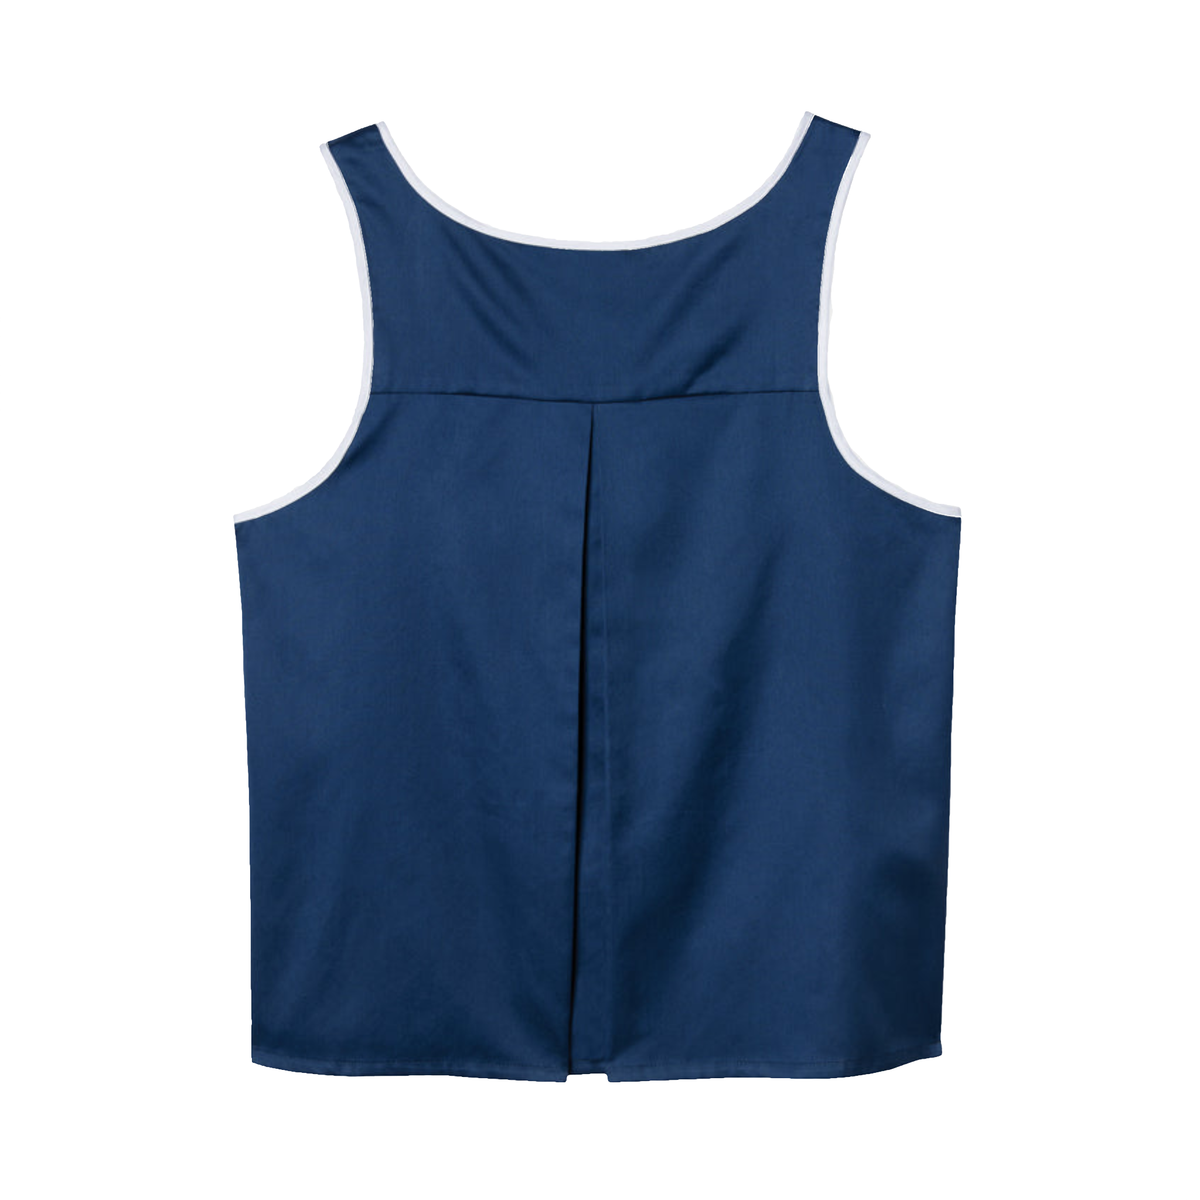 Back View of Navy Sferra Caricia Swing Tank Top against a white background